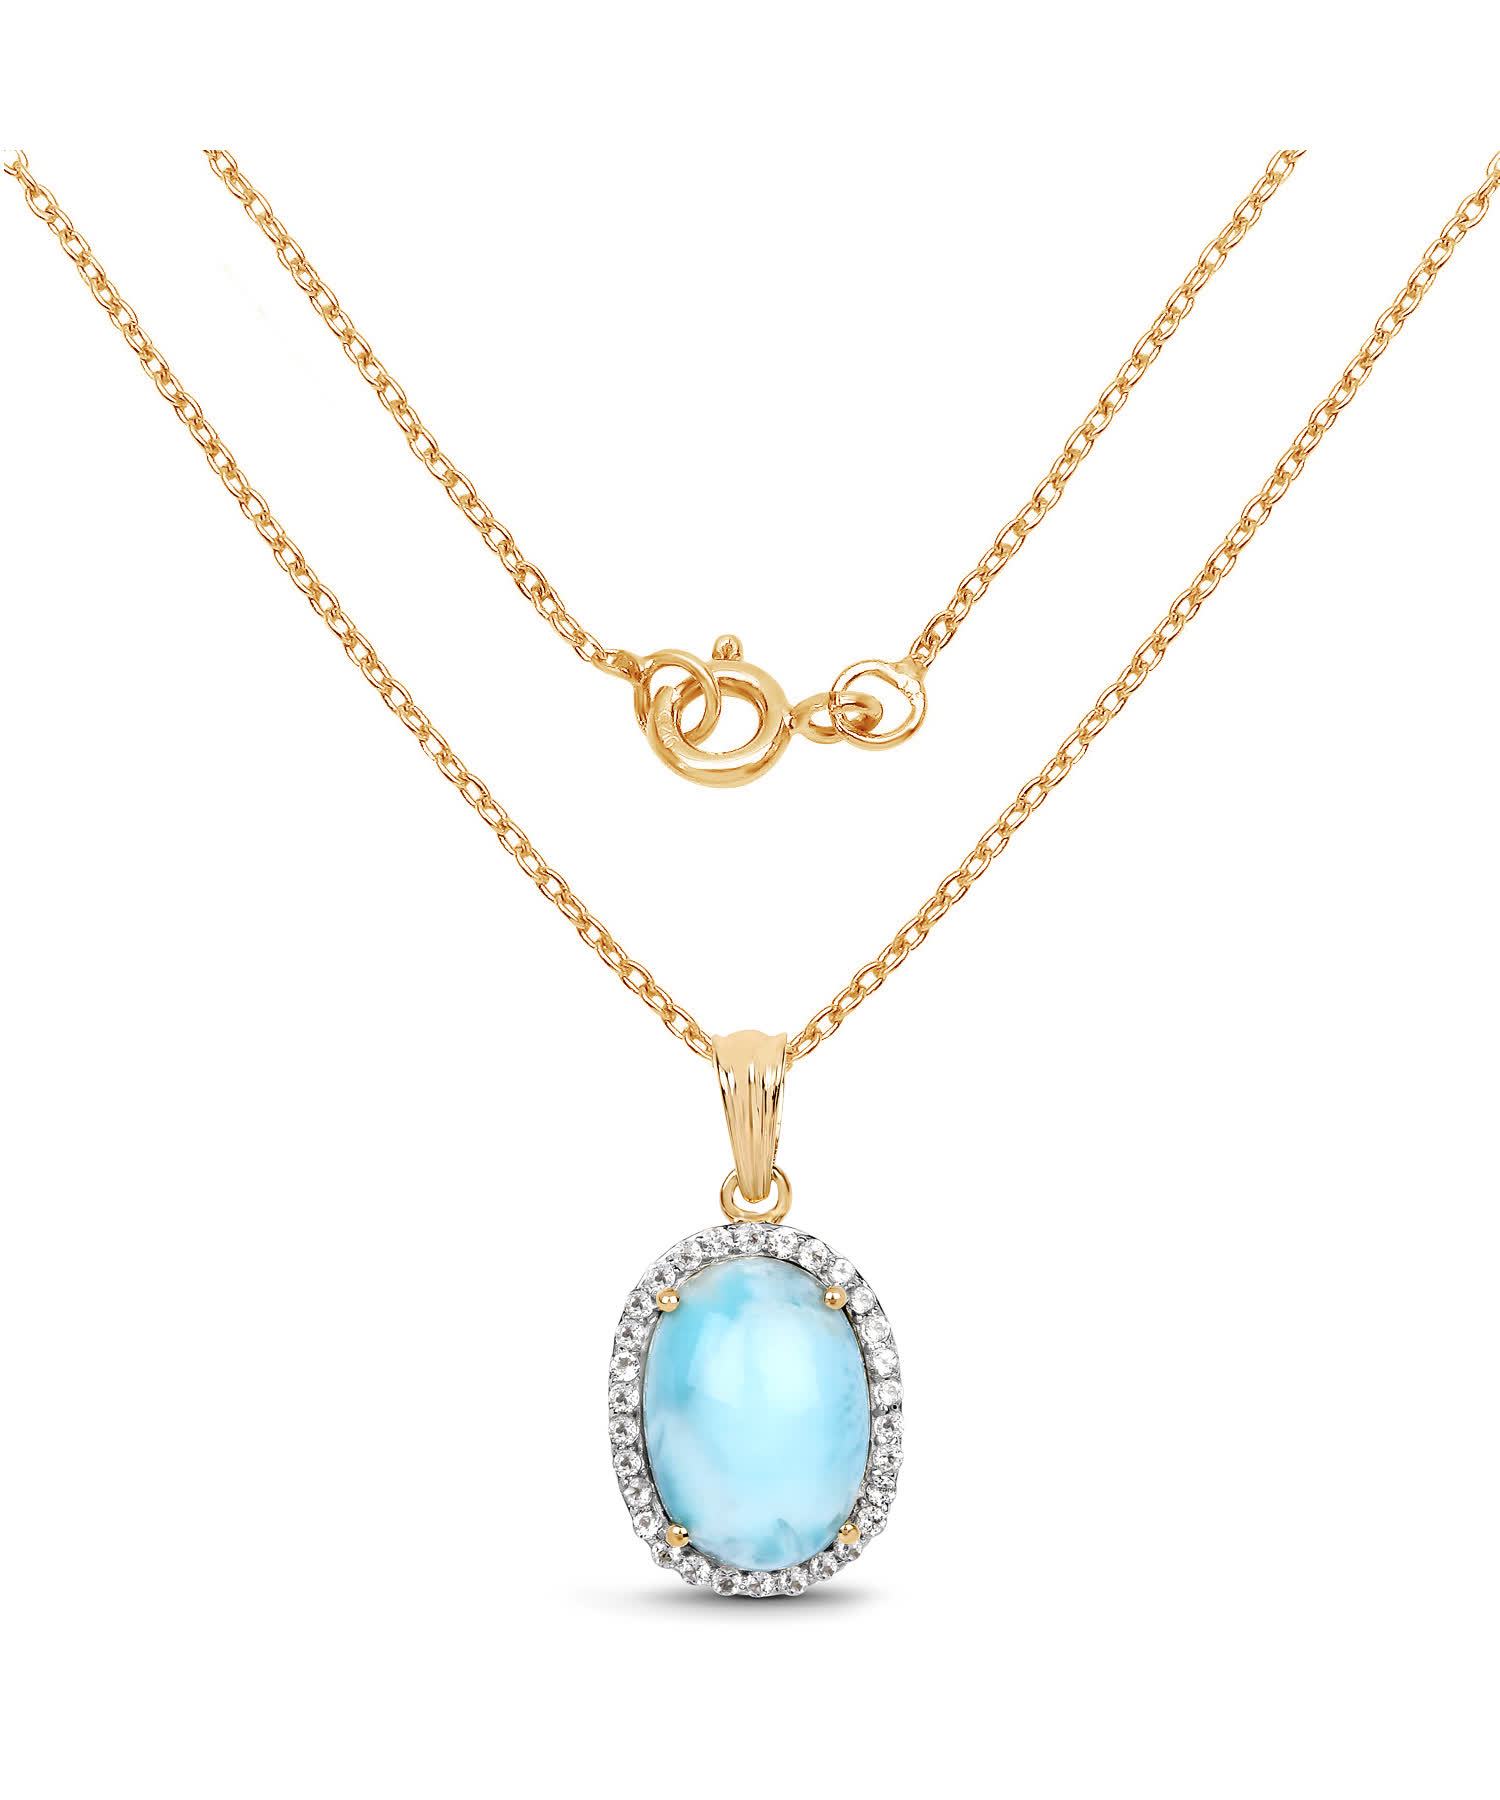 13.55ctw Natural Larimar and Topaz 14k Gold Plated 925 Sterling Silver Oval Pendant With Chain View 2